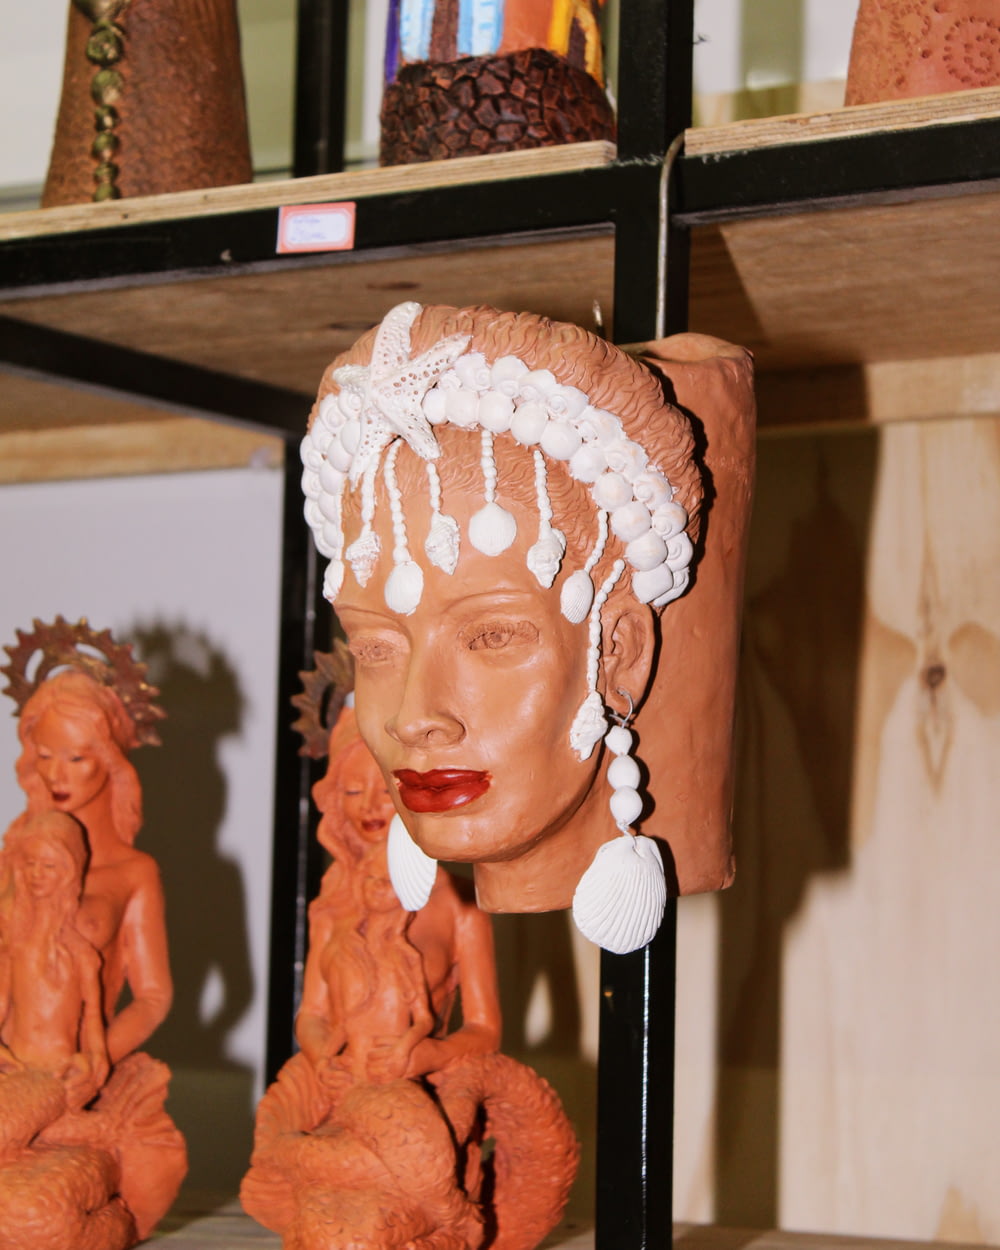 a shelf with clay sculptures of women on it